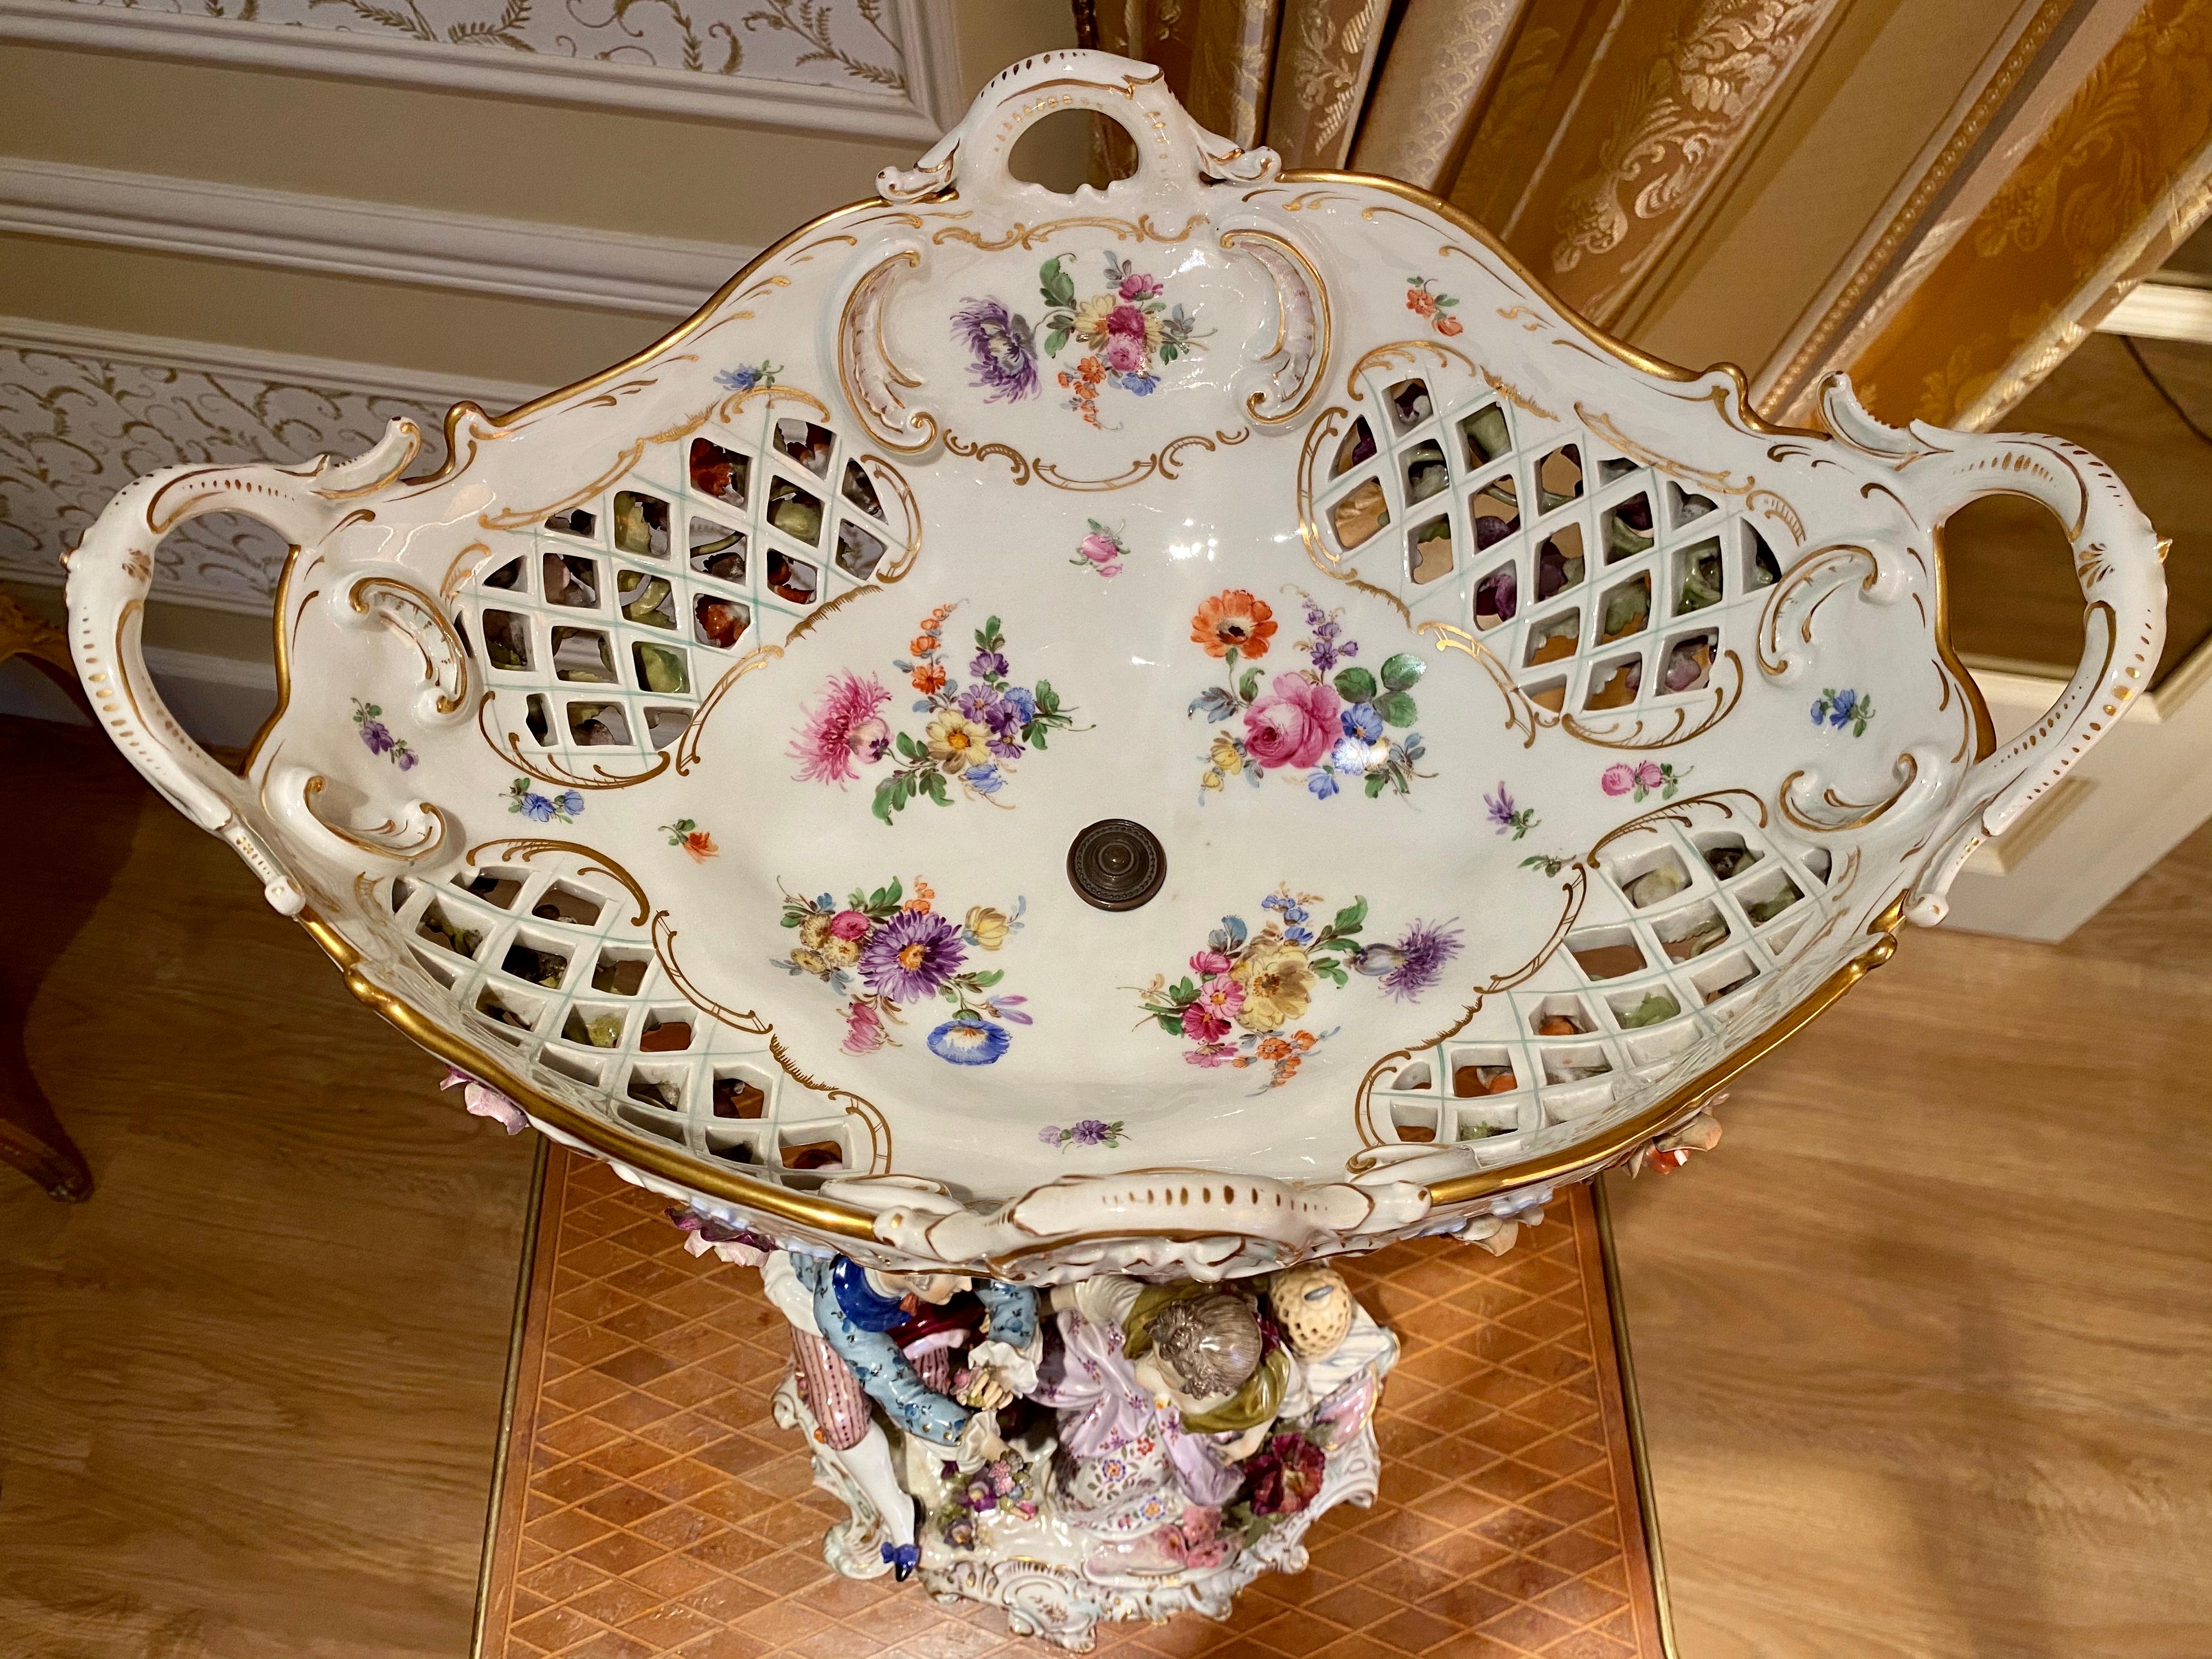 Superb and large centerpiece in German porcelain. Base representing a gallant scene composed of three characters, the set surmounted by a large openwork cup with floral decorations. This piece is in very good condition, has a stamp underneath and a